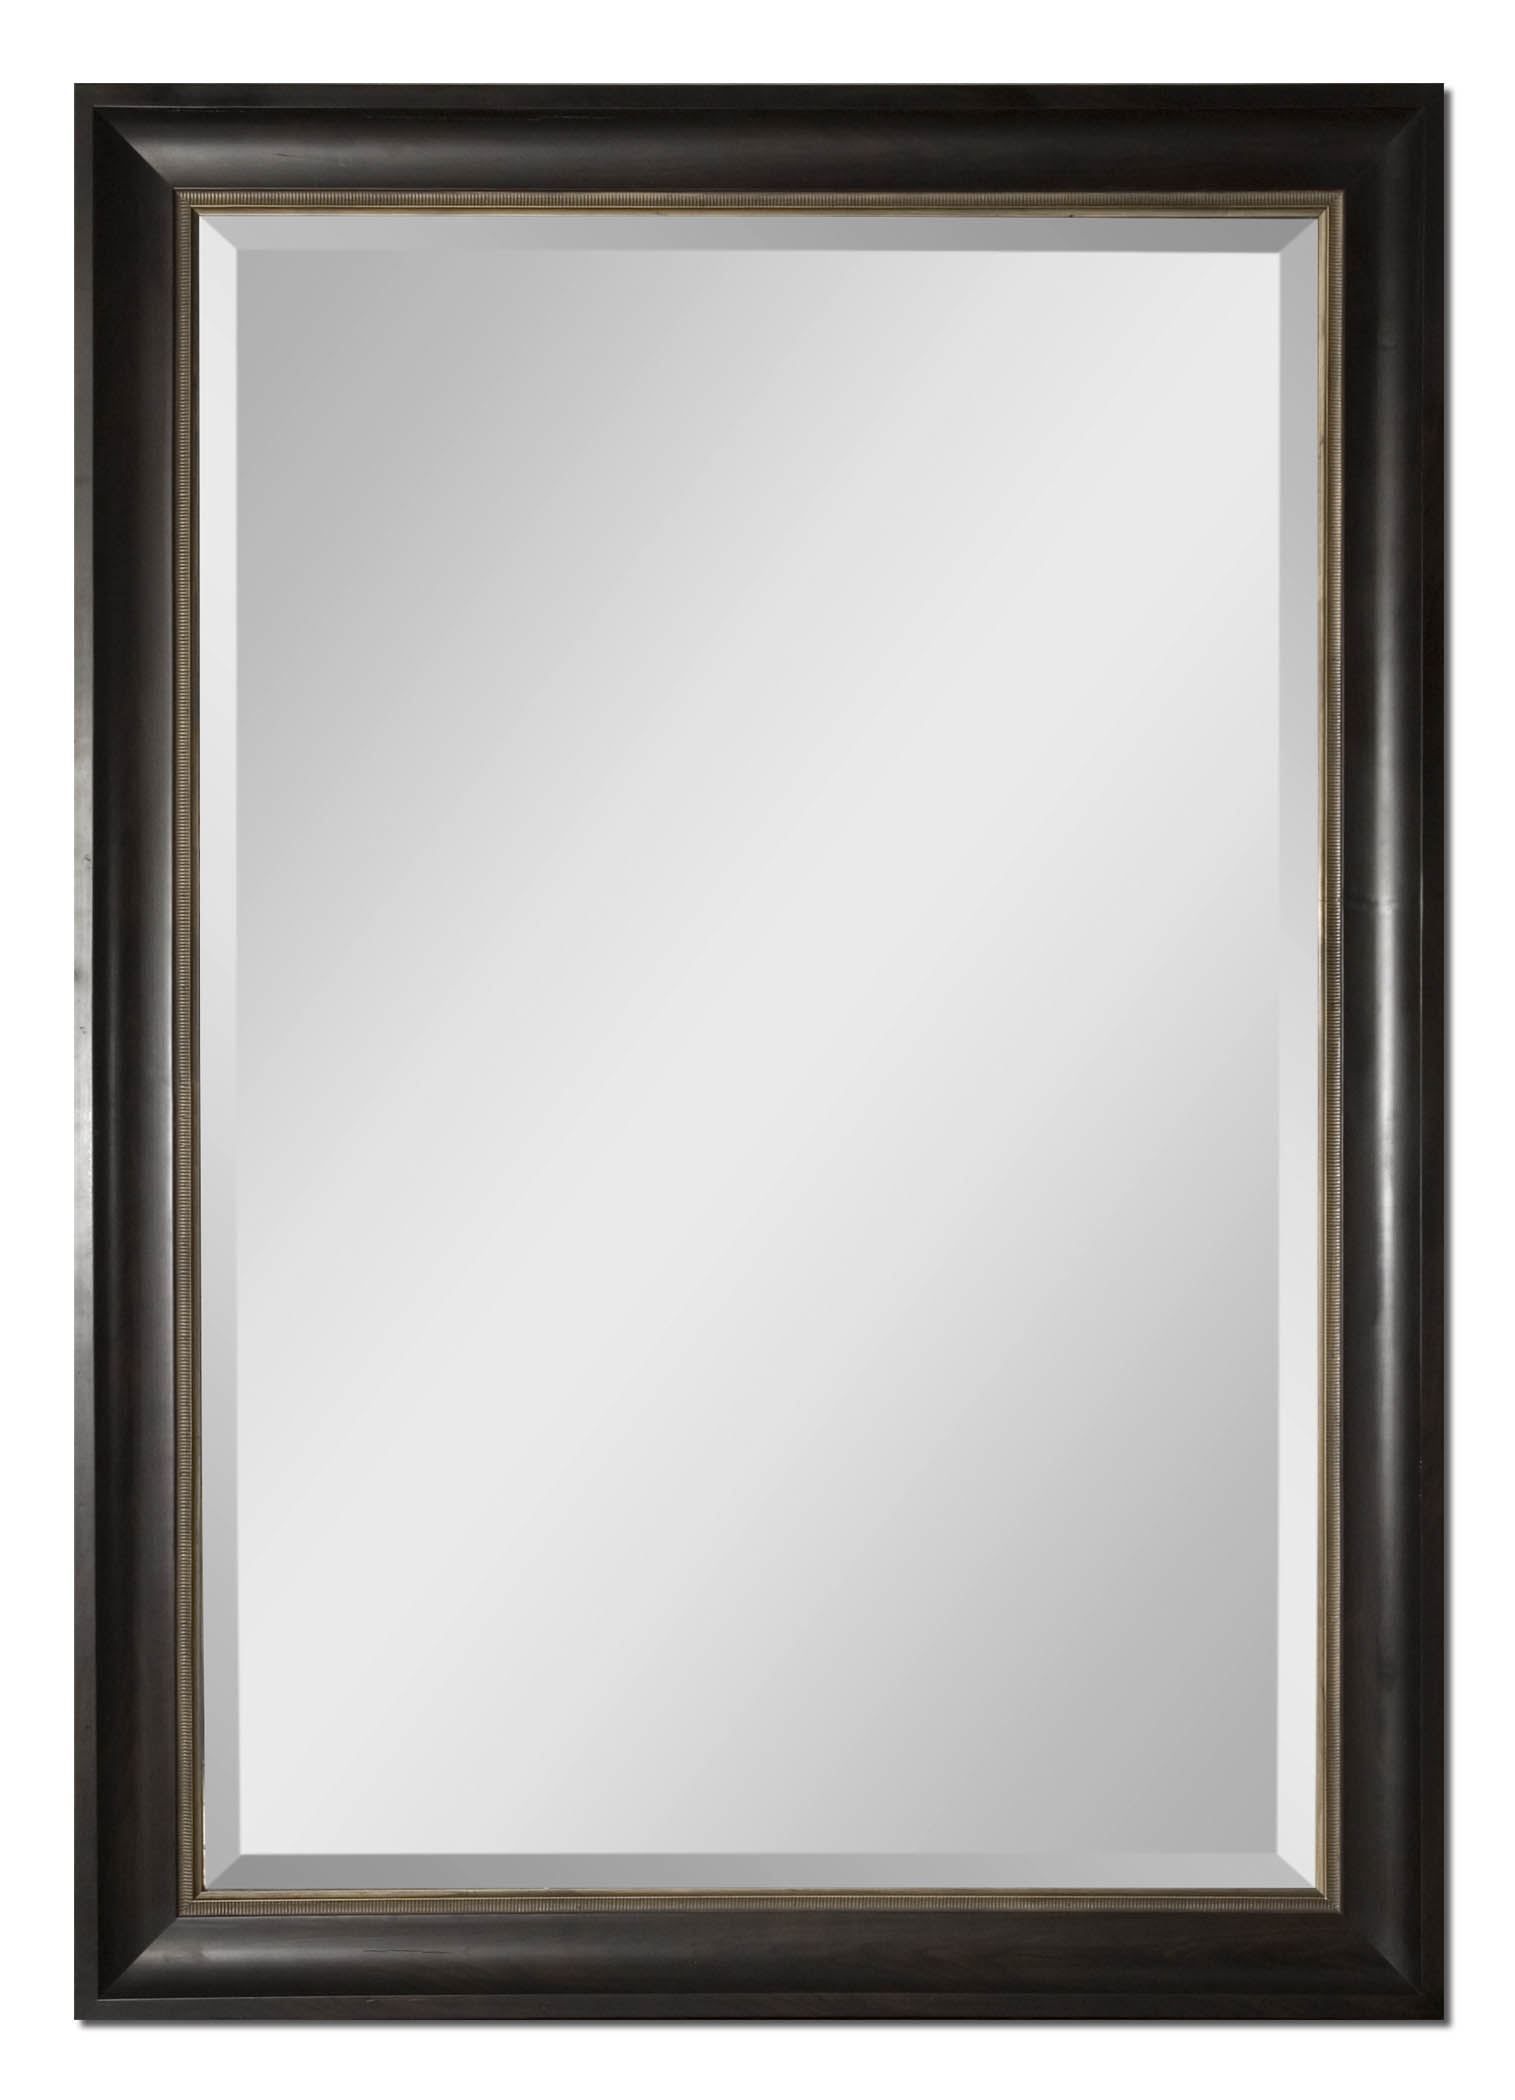 Axton Oversized Black Framed Mirroruttermost | Black Mirror Frame In Matte Black Square Wall Mirrors (View 8 of 15)